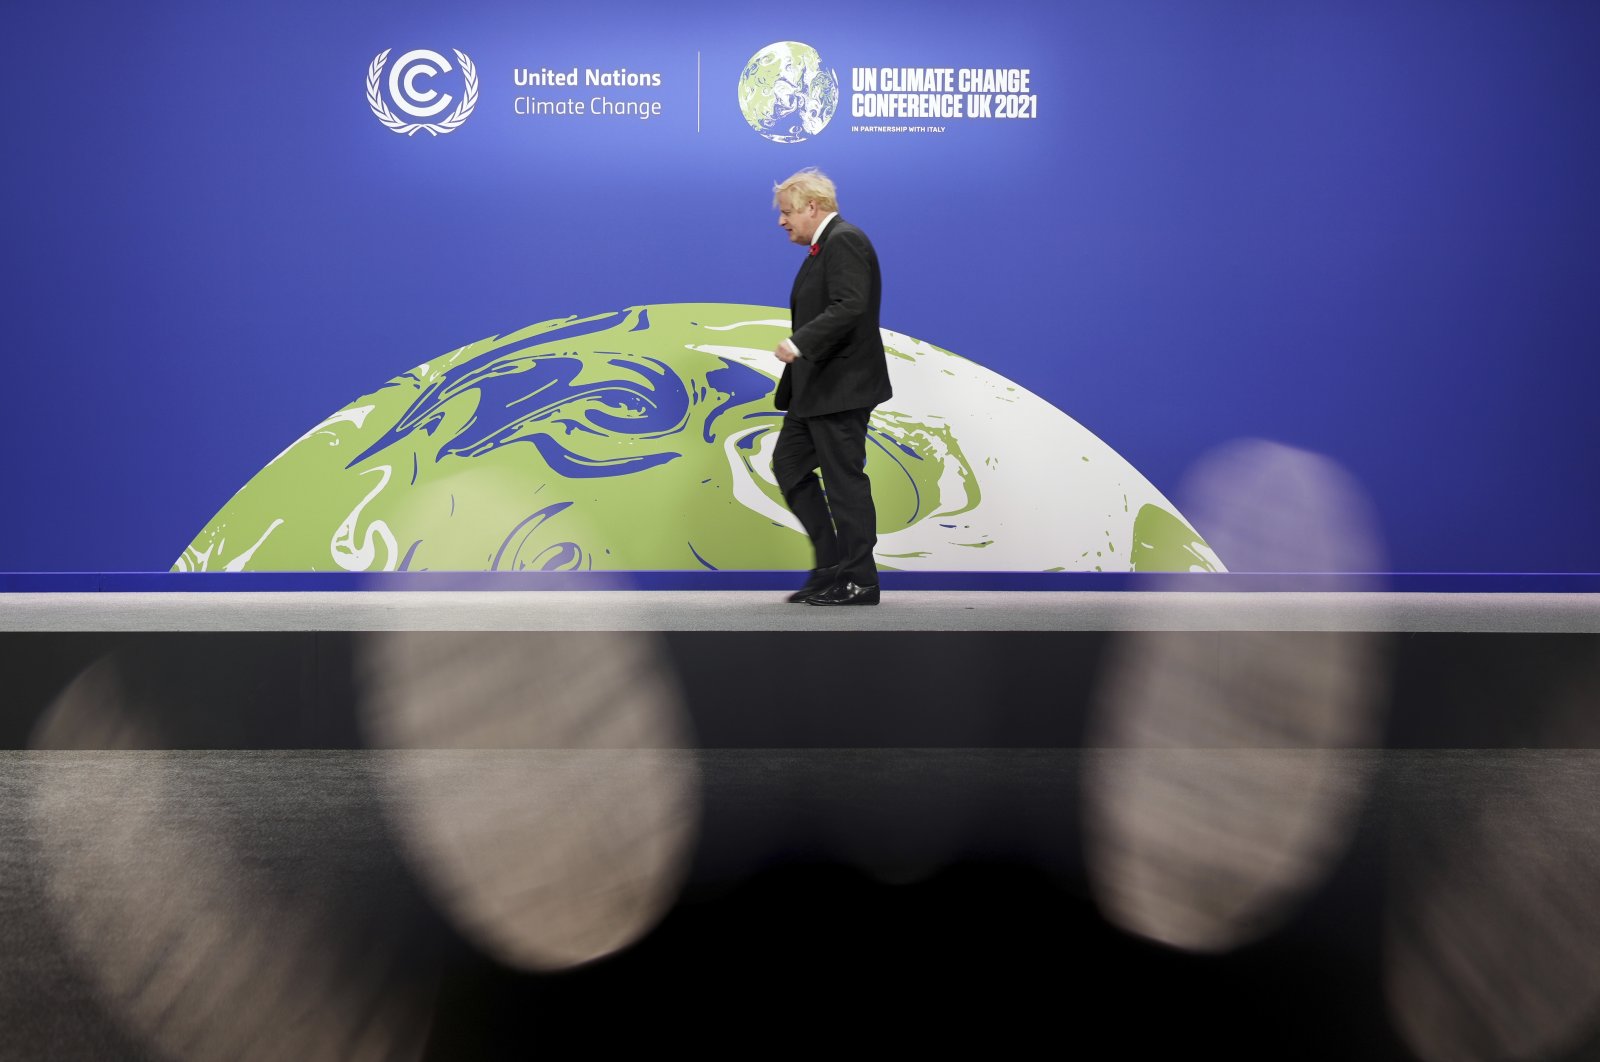 British Prime Minister Boris Johnson looks on as he prepares to receive attendees, at the COP26 U.N. Climate Summit in Glasgow, Scotland, Monday, Nov. 1, 2021. (Christopher Furlong/Pool via AP)